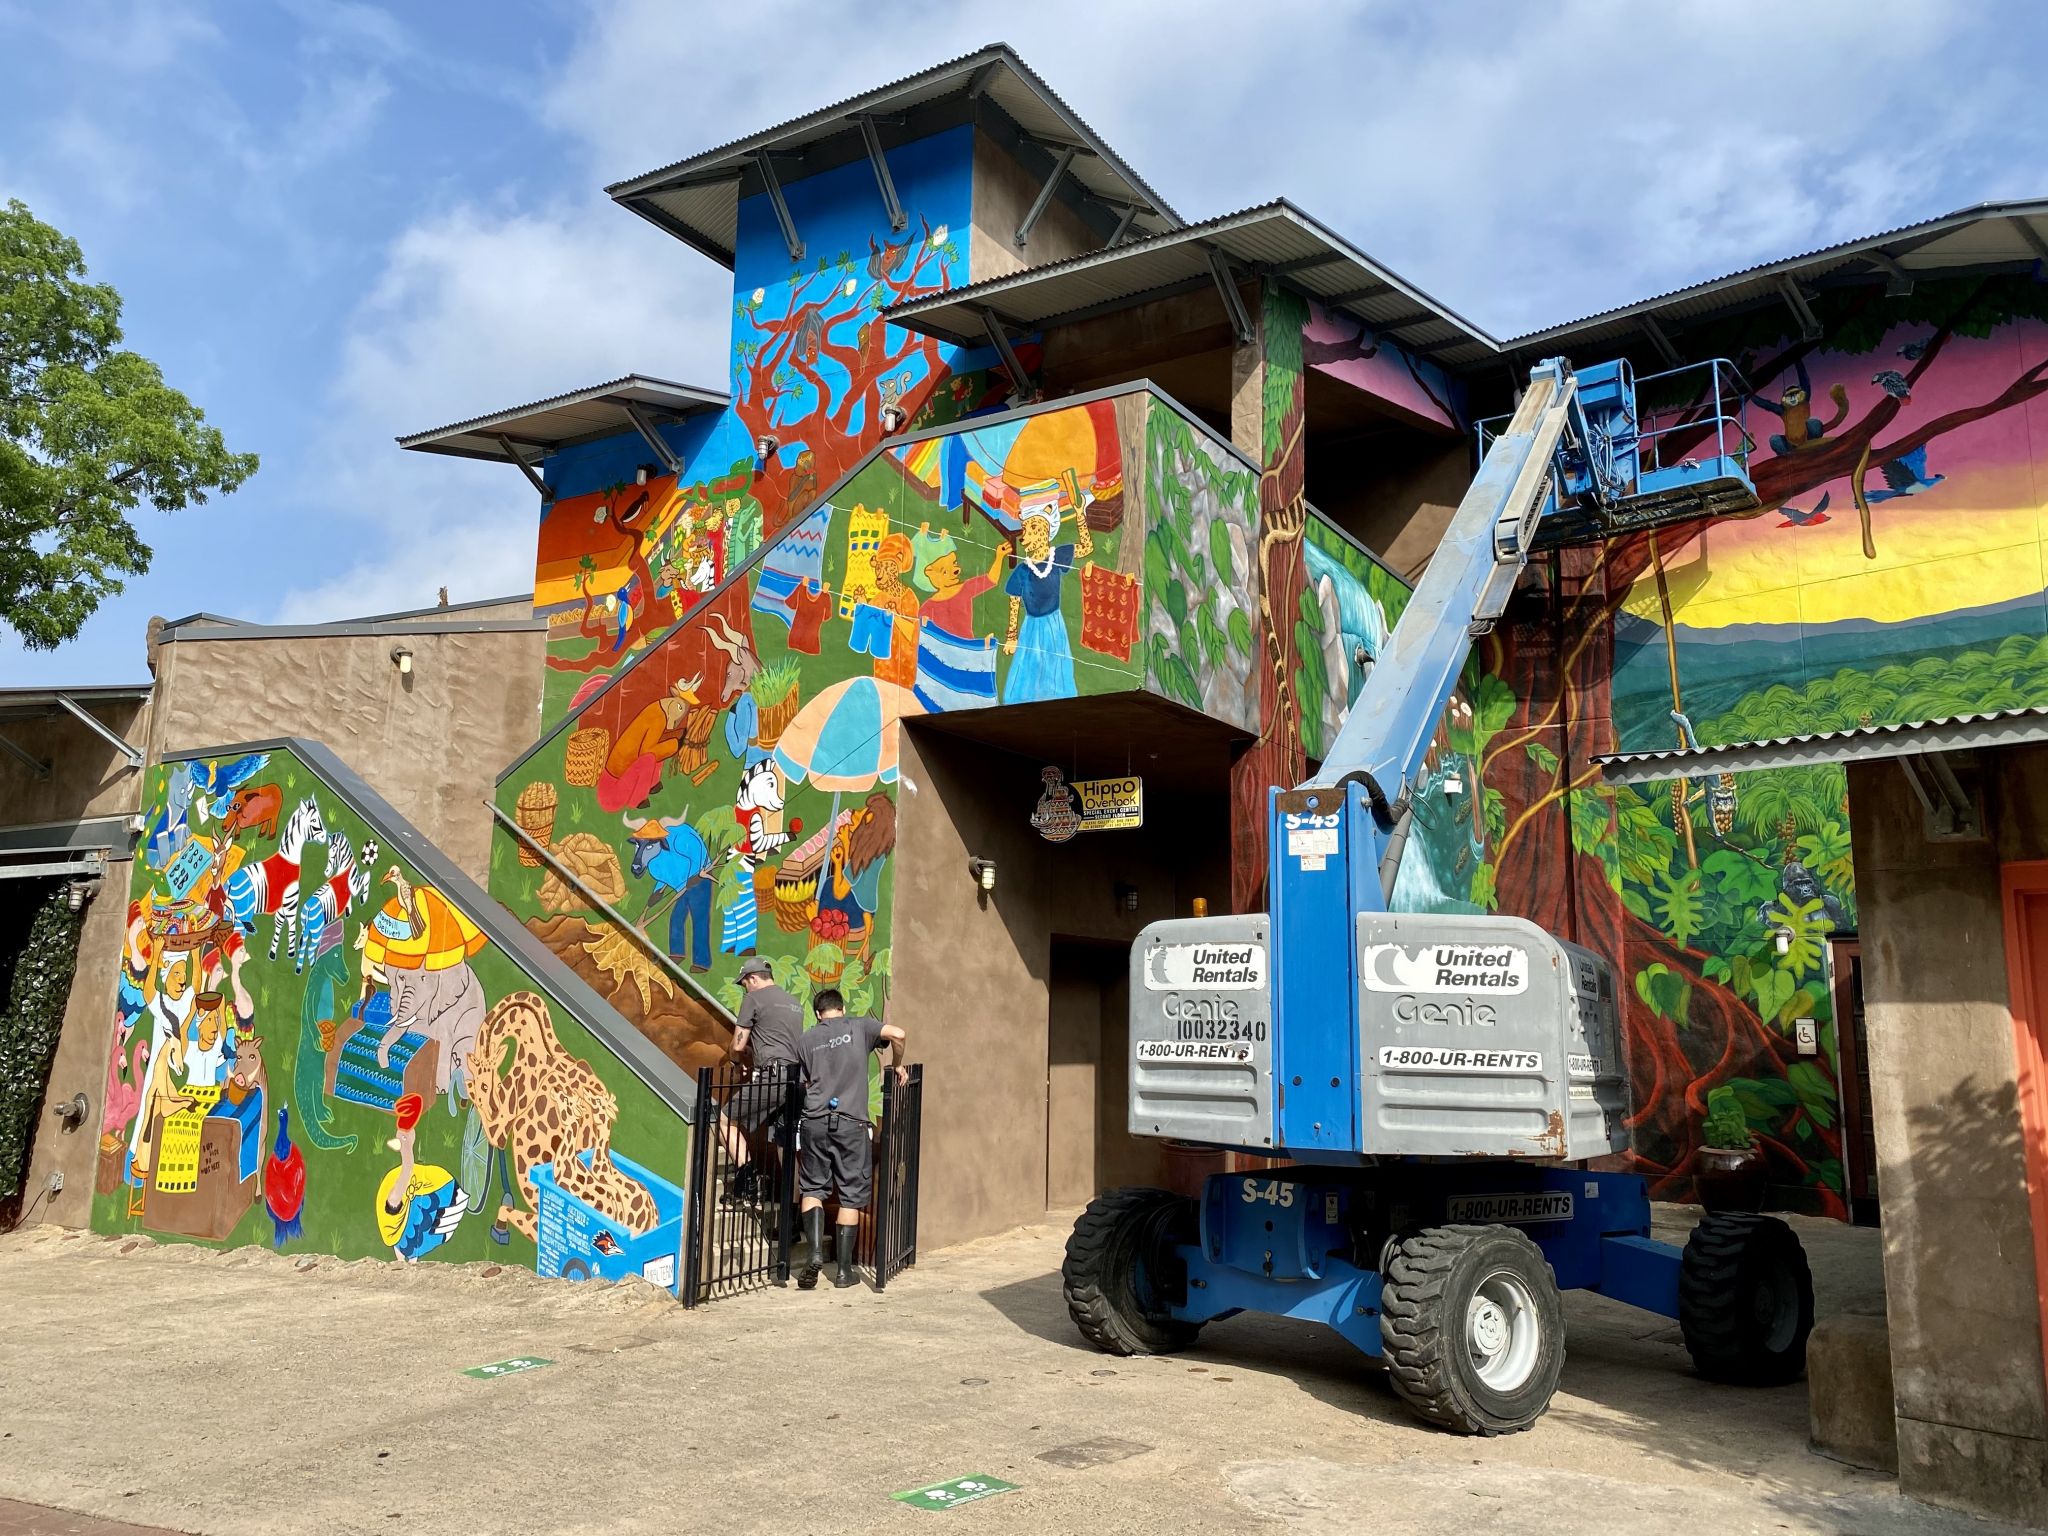 Houston Astros: Artists collaborate to paint 60th anniversary mural